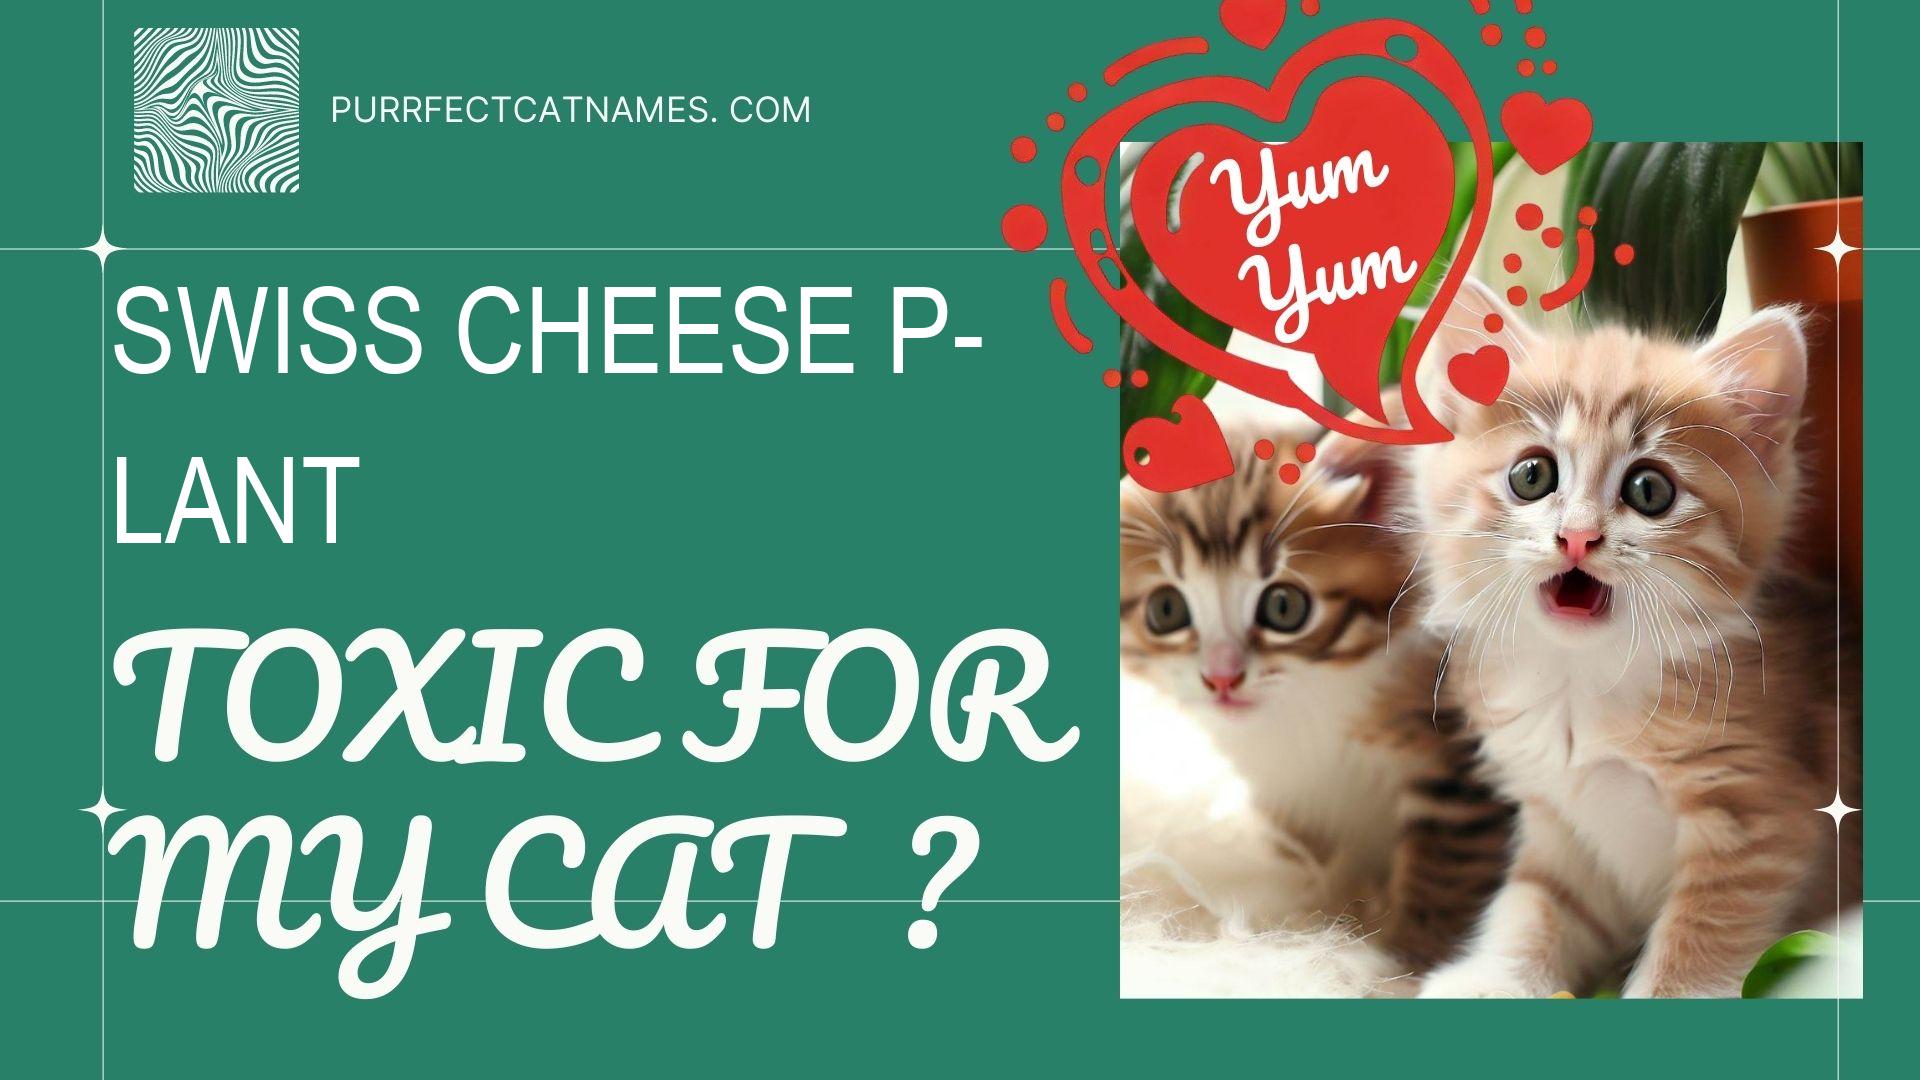 IsSwiss Cheese Plant plant toxic for your cat